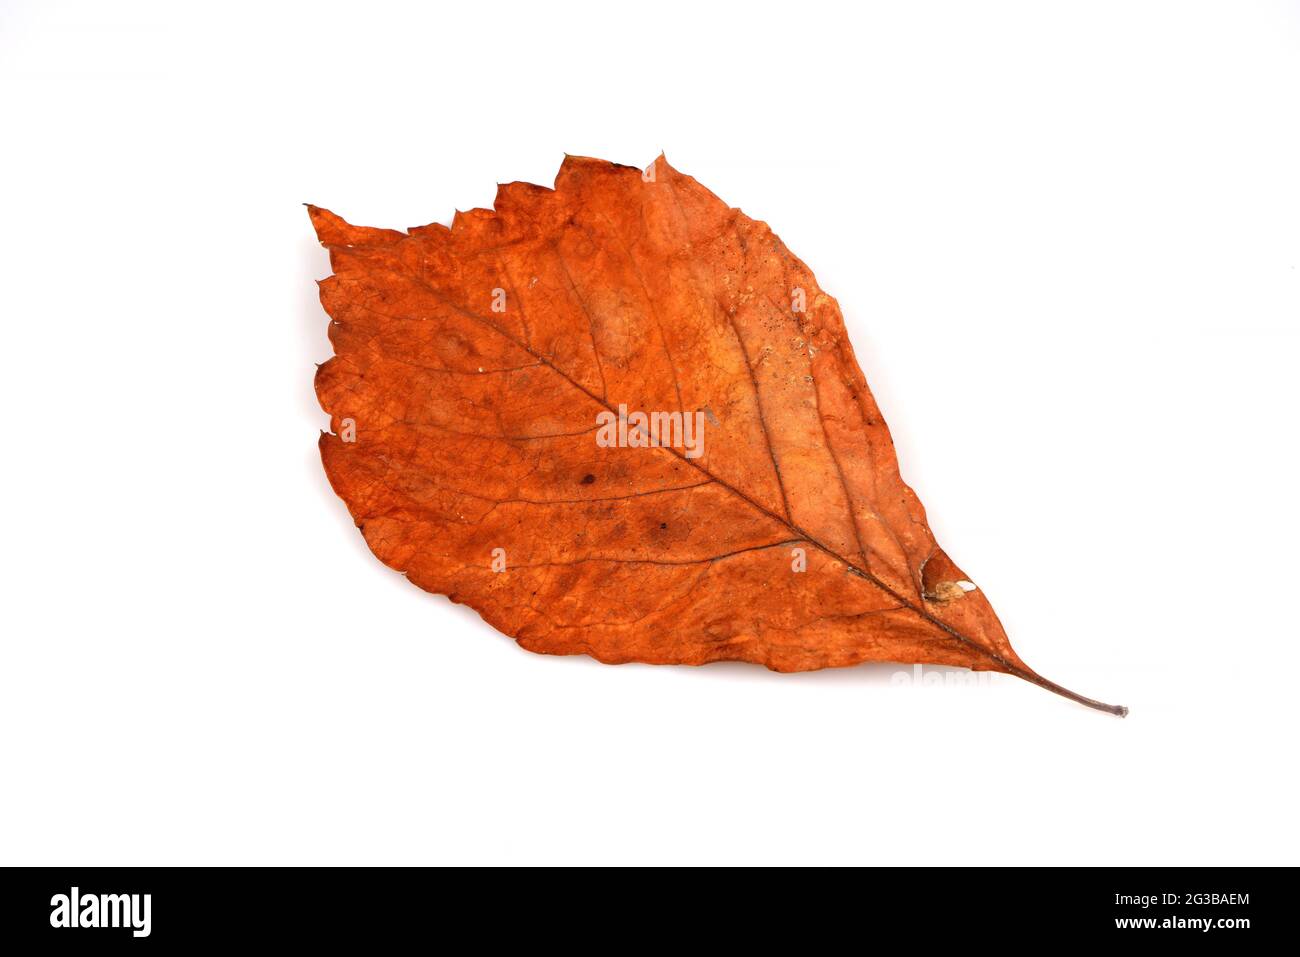 Natural fallen dry leaf isolated on white background Stock Photo